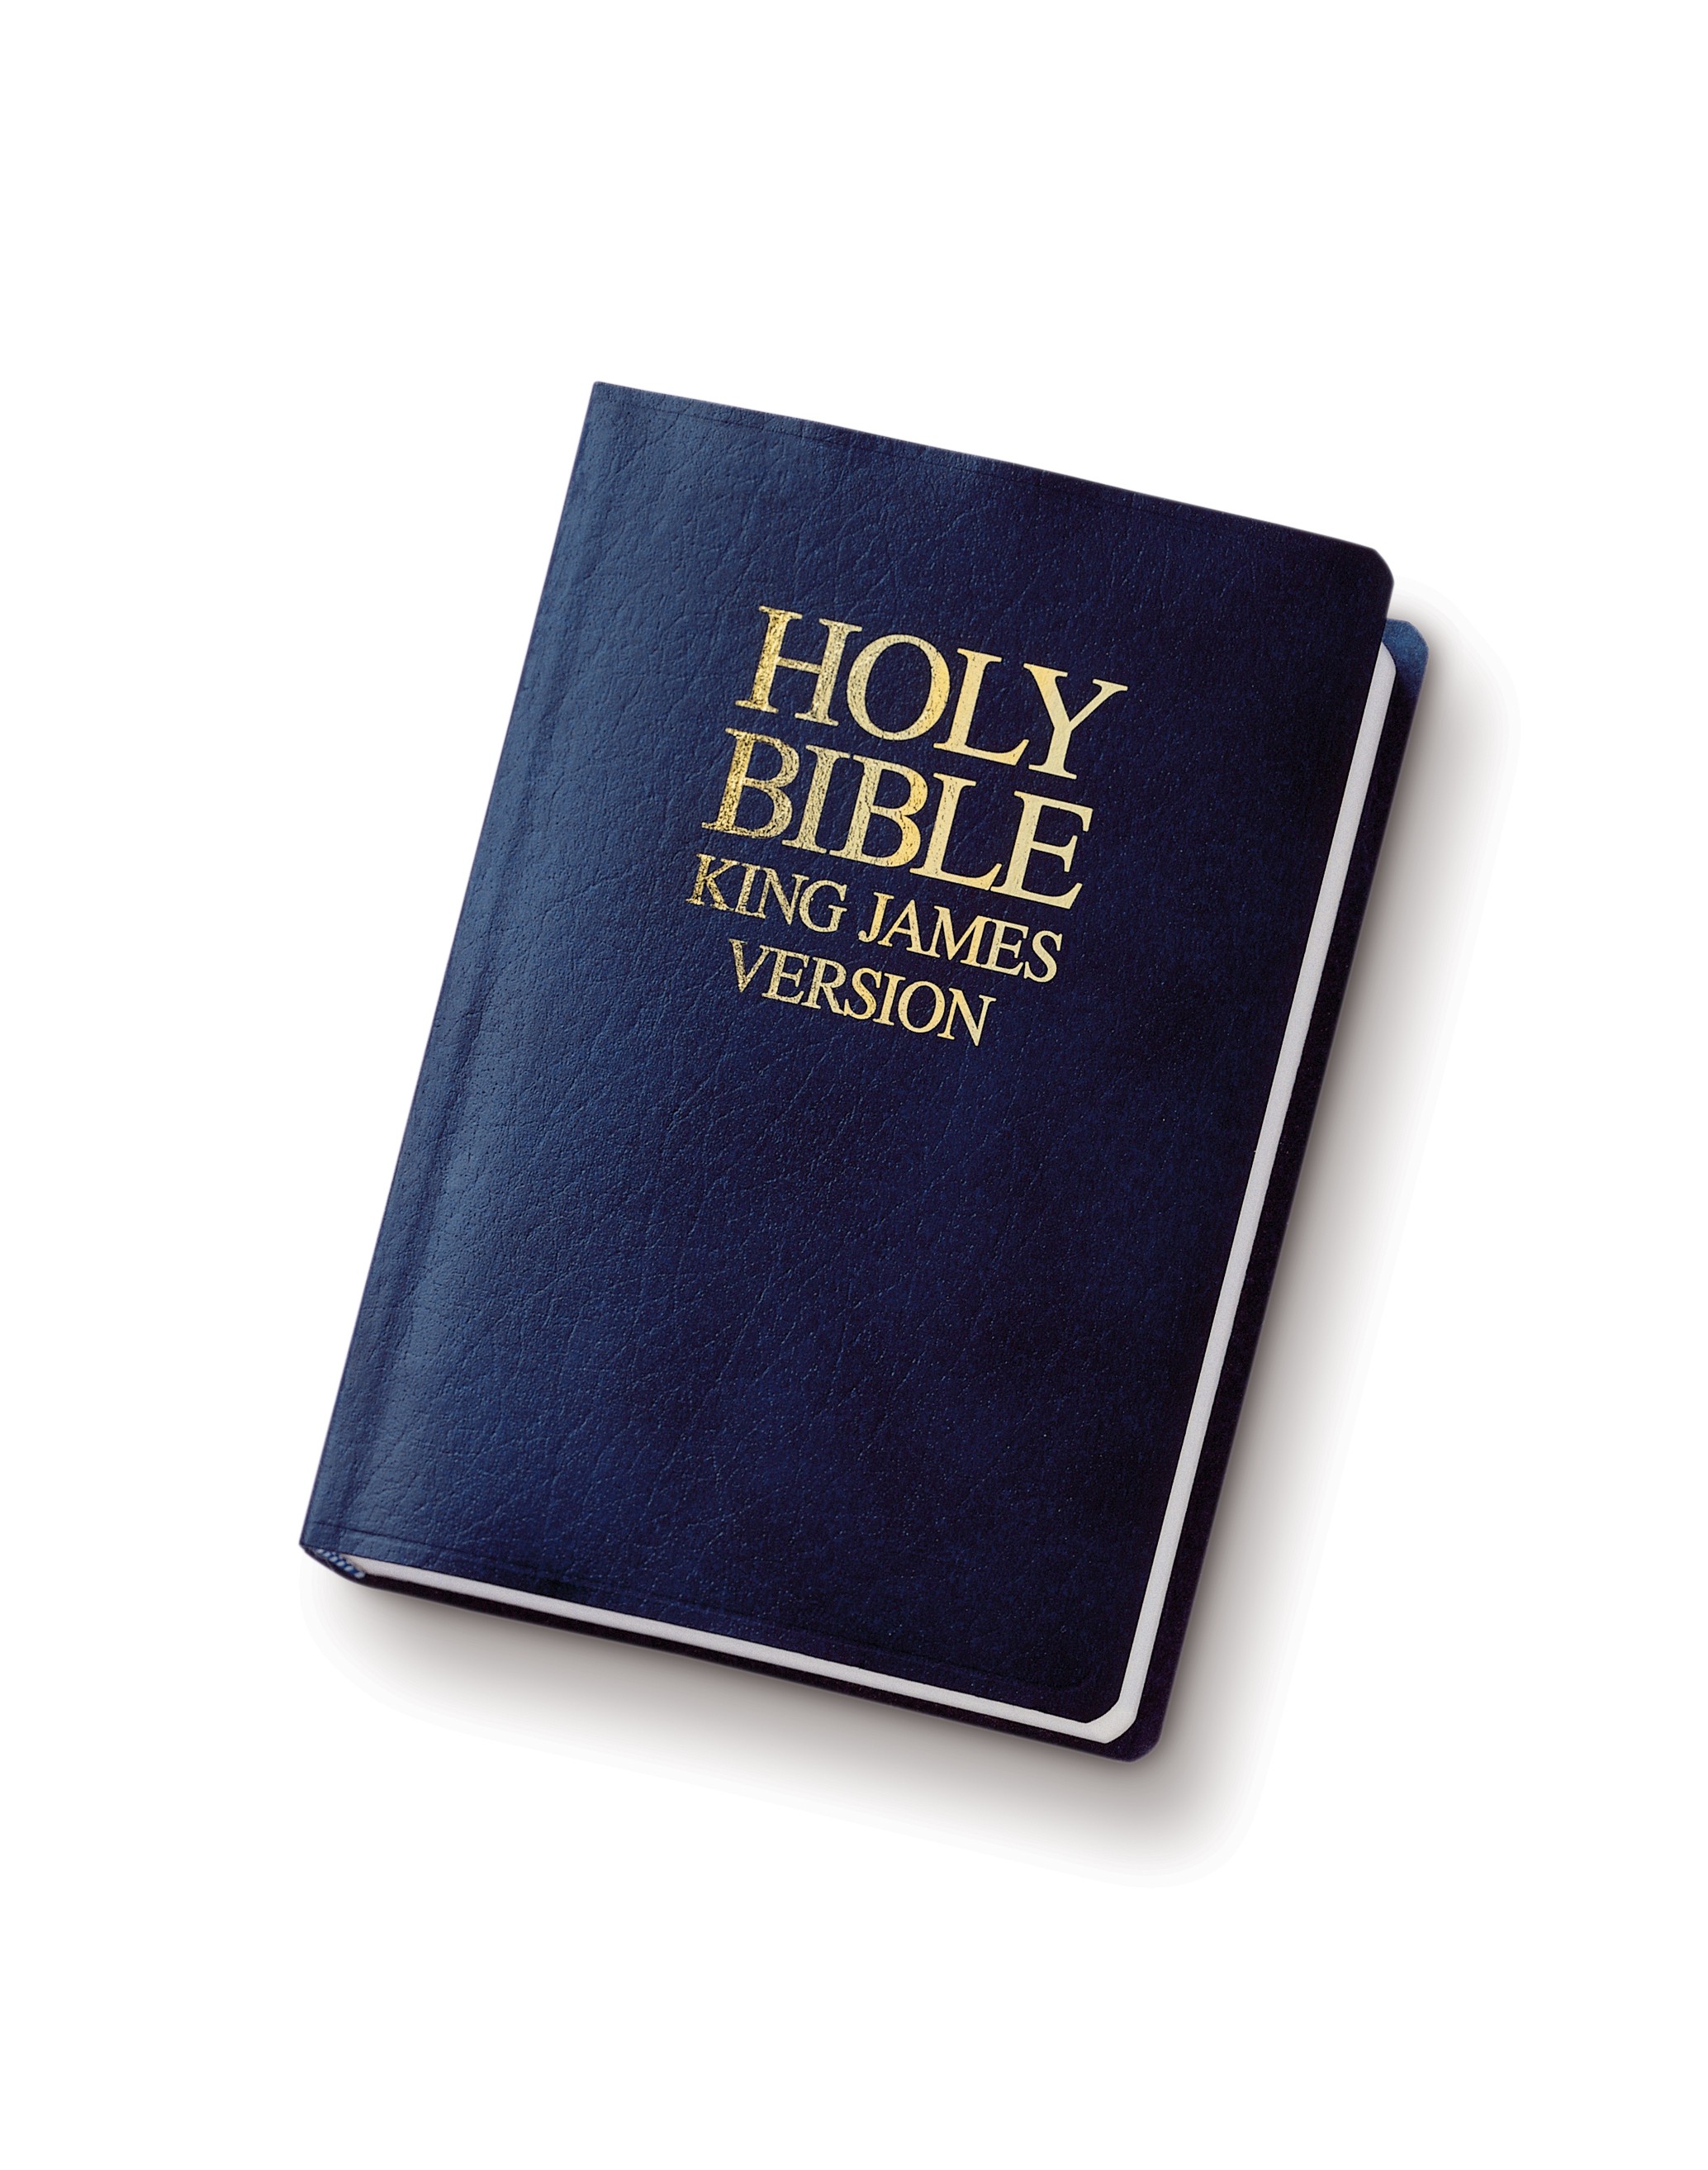 A photograph of a blue hardcover King James Version of the Holy Bible.